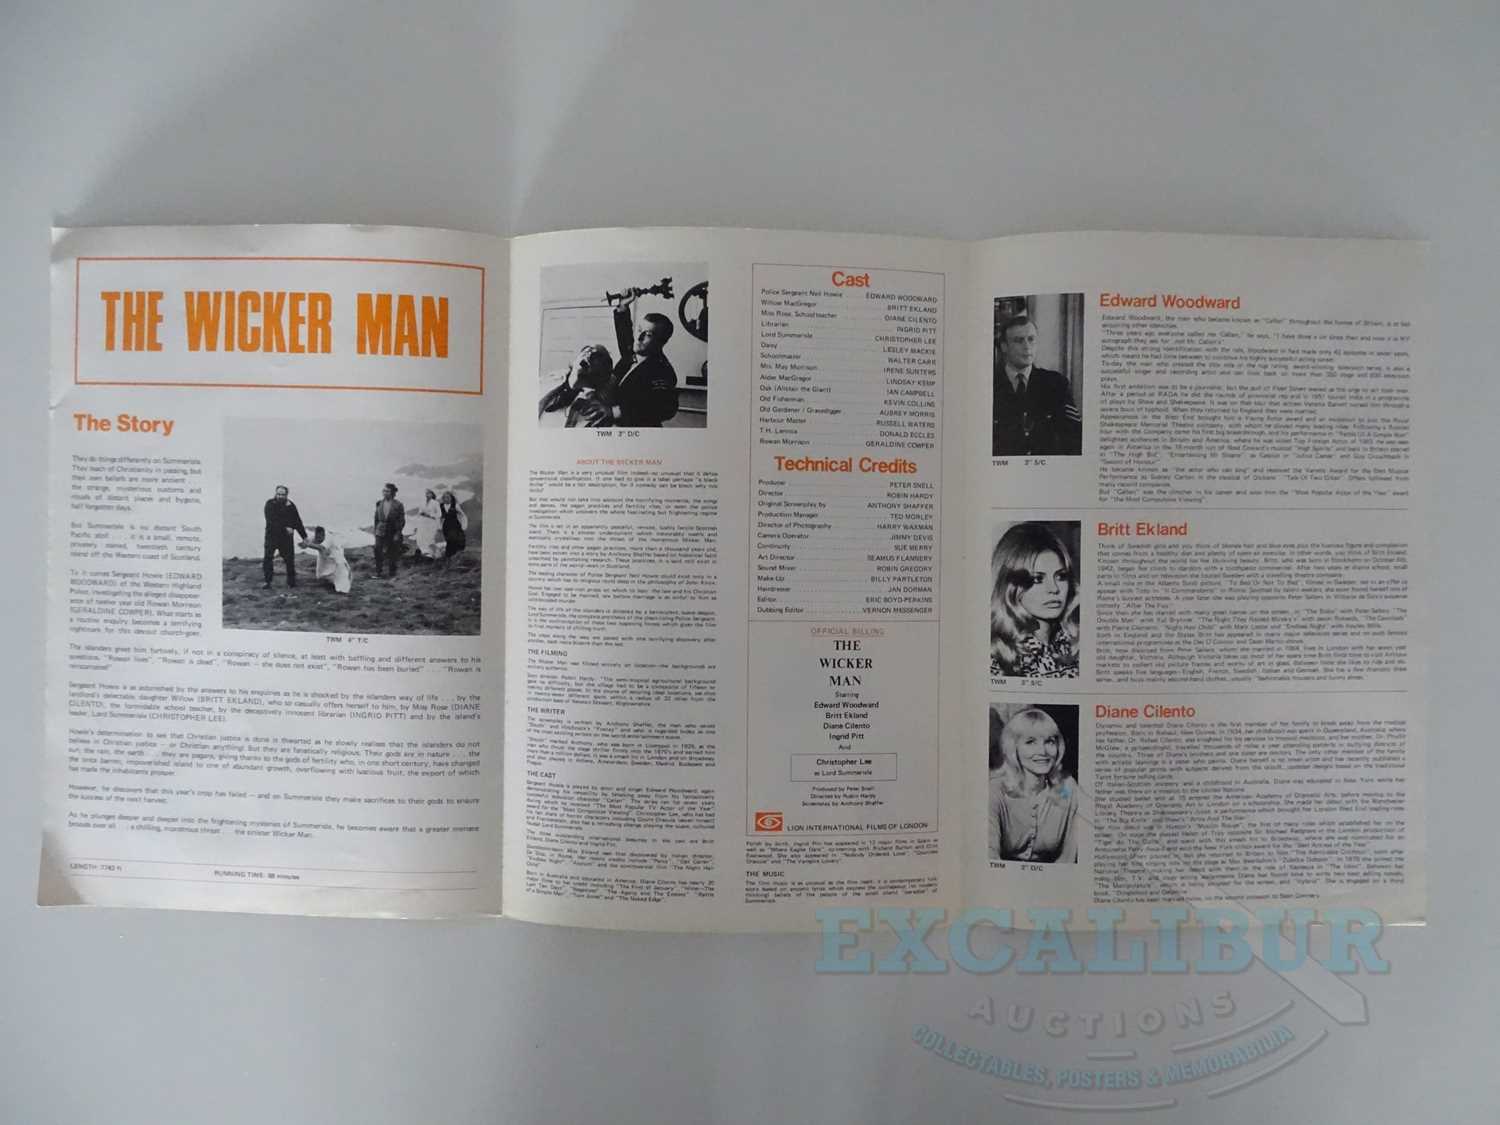 THE WICKER MAN (1973) - A British press campaign brochure - Flat/Unfolded (as issued)(1 in lot) - Image 2 of 2